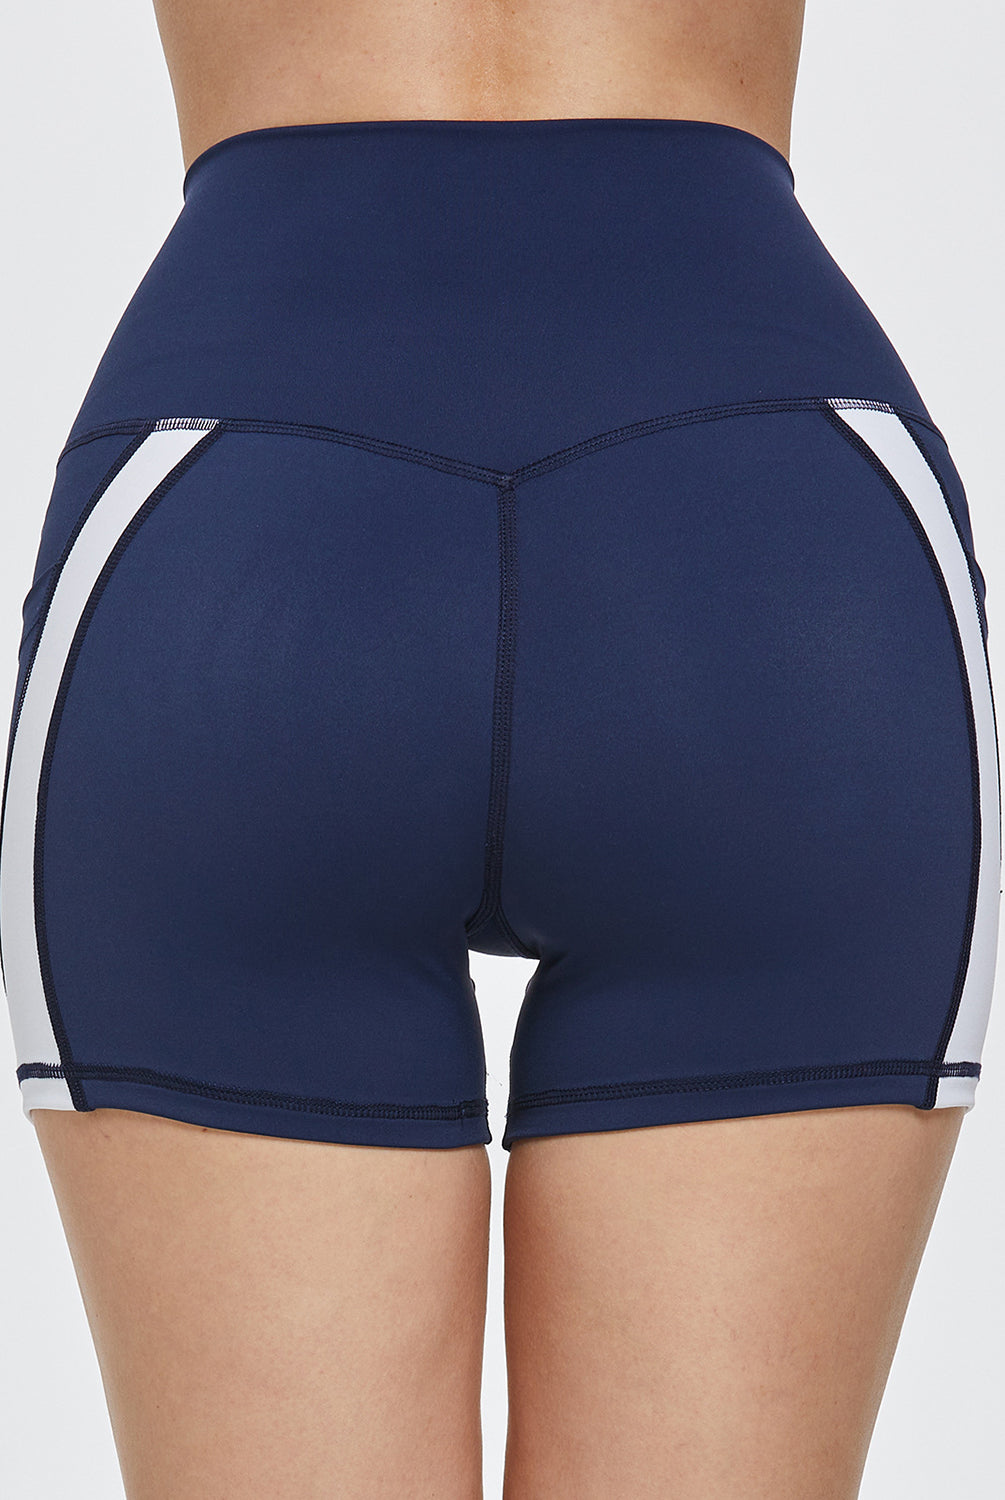 Athlete in dynamic active shorts featuring a practical pocket, ready for a workout session.